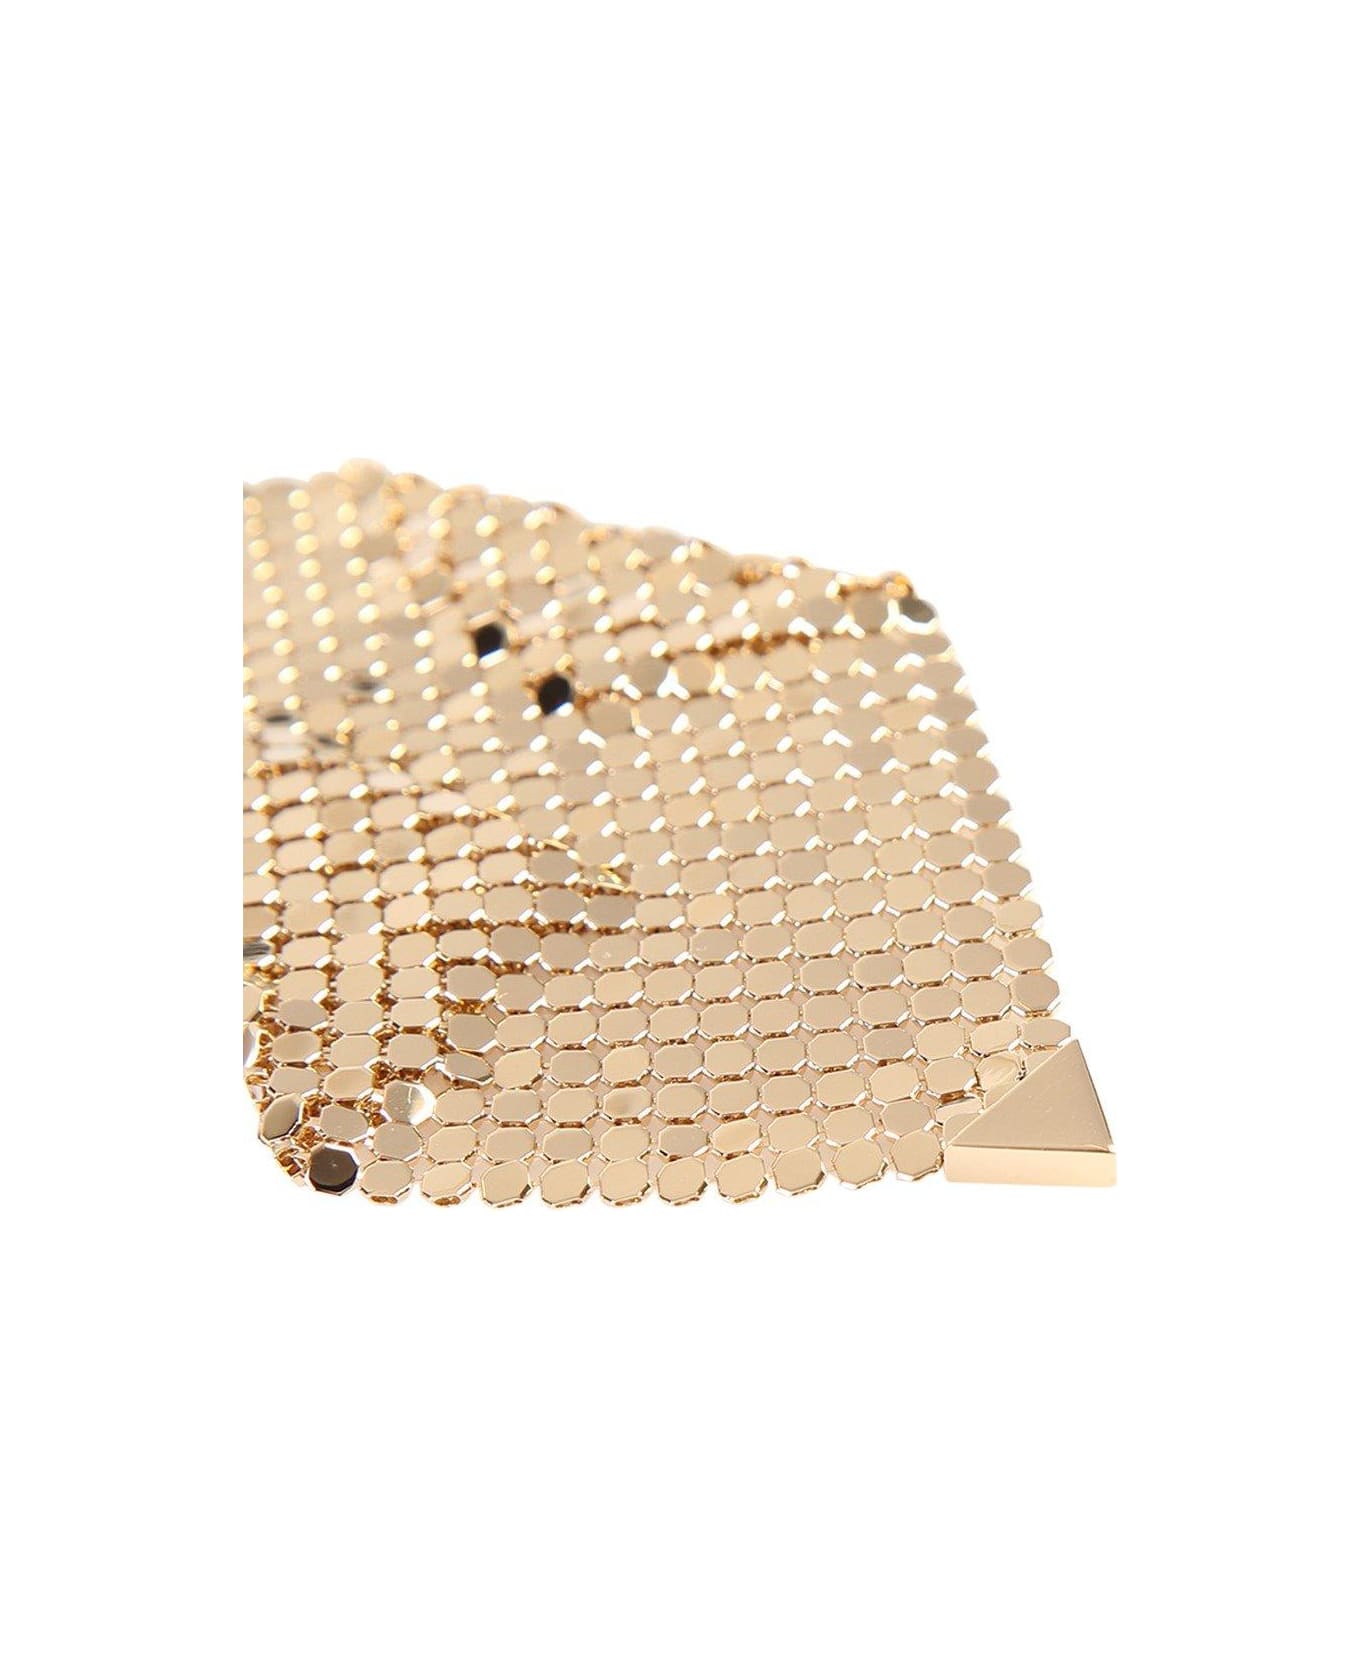 Paco Rabanne Chained Mesh Earrings - GOLD イヤリング